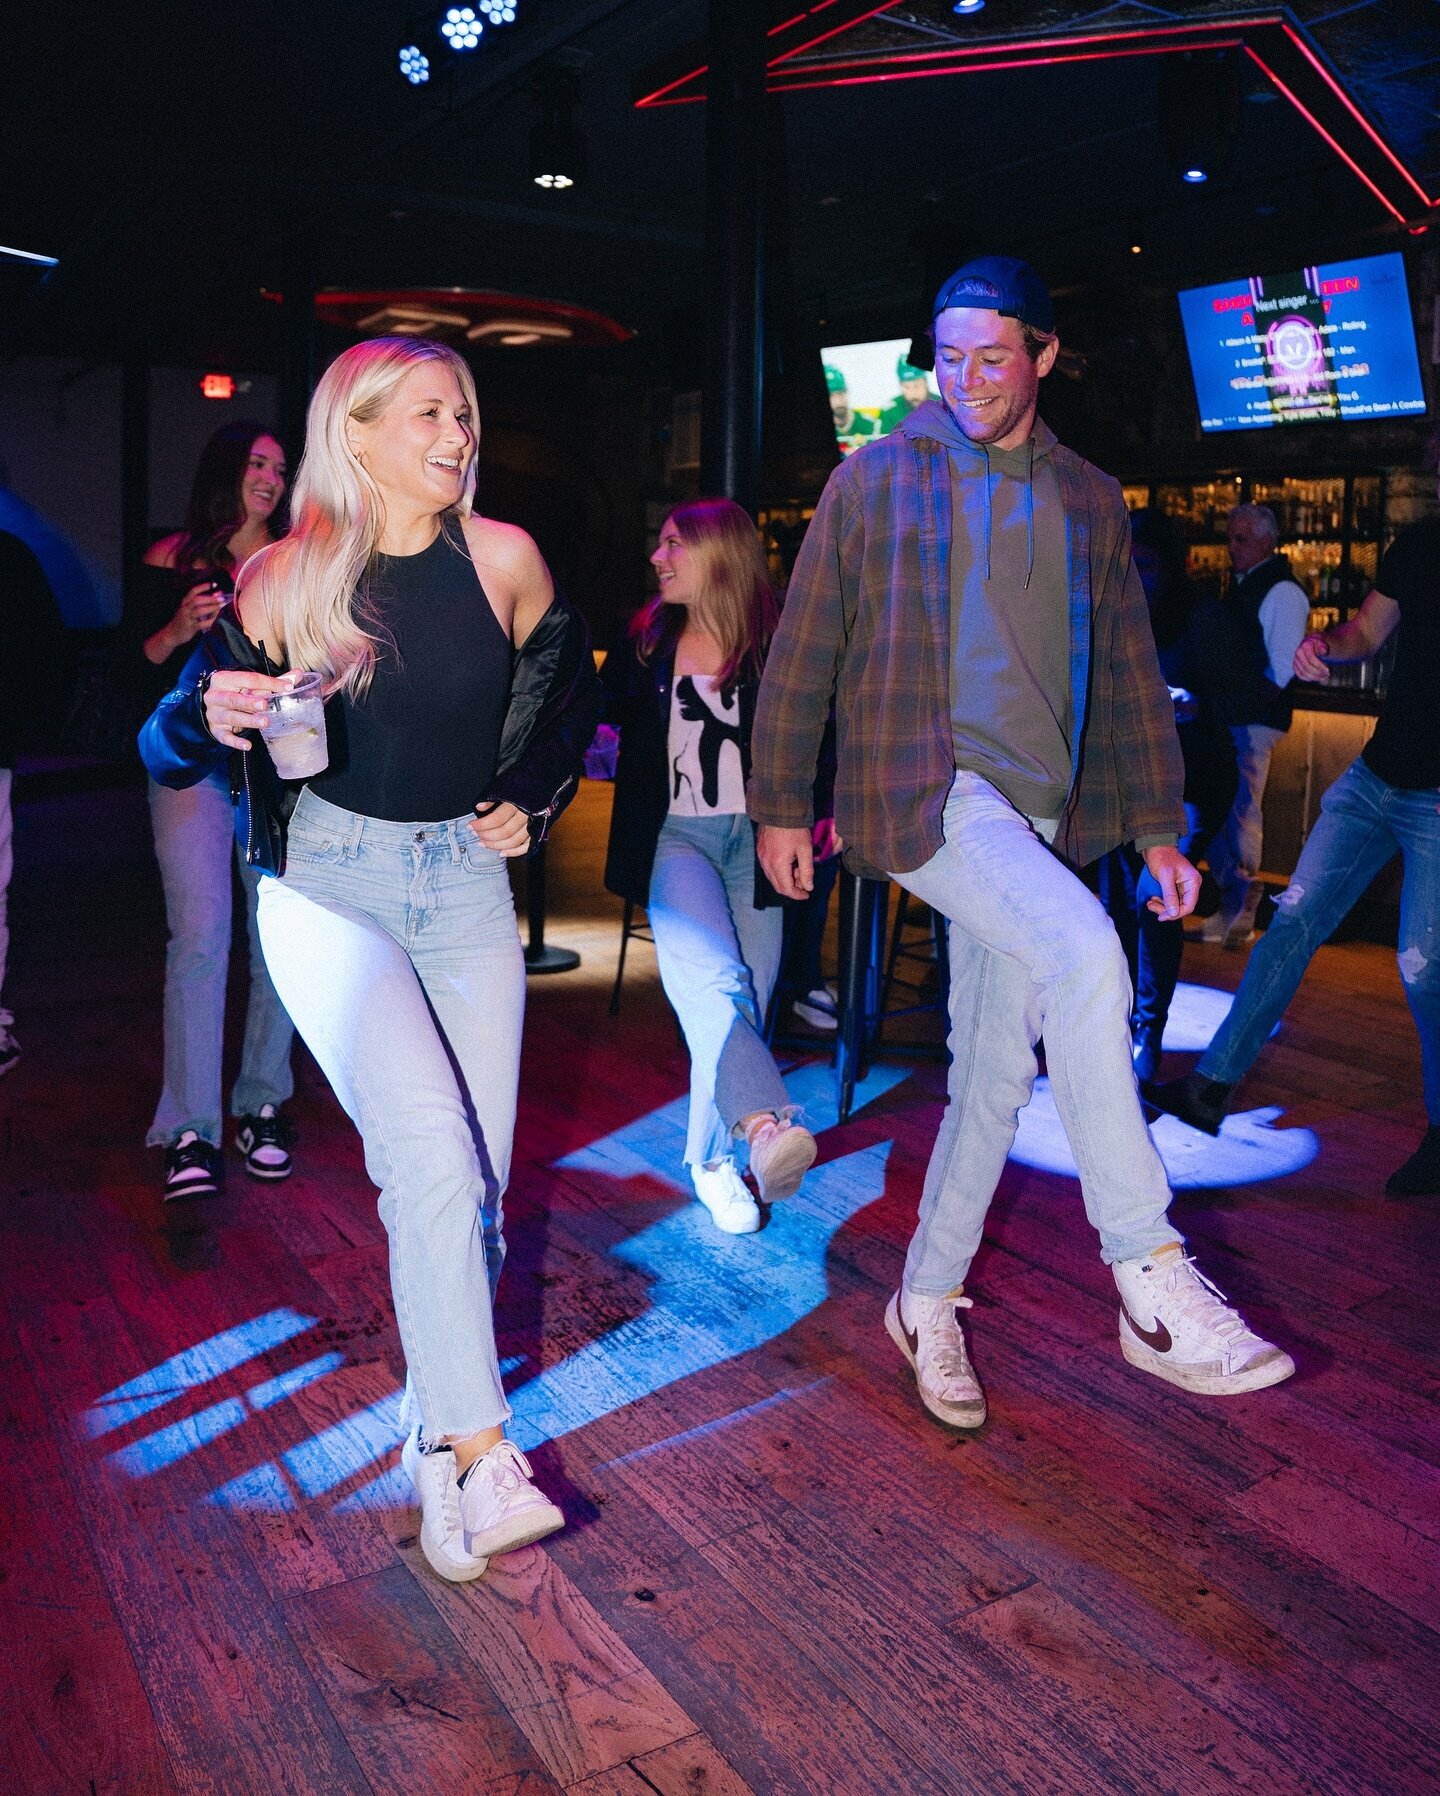 Grab your dancing partner and come rock with us 

Our doors open at 4 and we got Happy Hour until 7 - y&rsquo;all don&rsquo;t wanna miss it 🍻